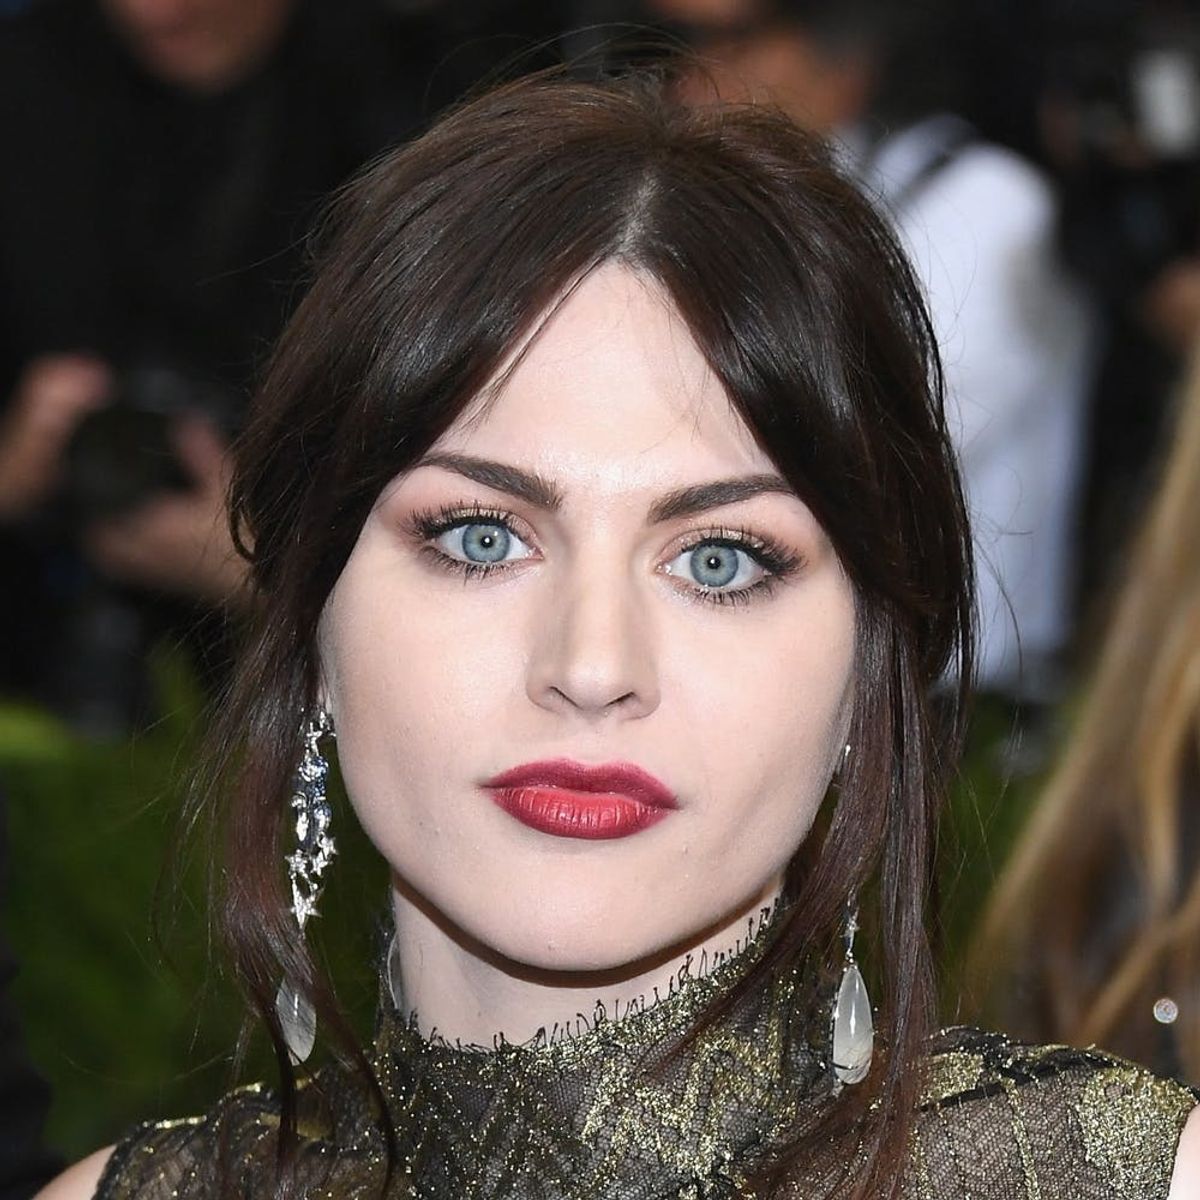 Frances Bean Cobain Says She’s a “Different Person” After a Near-Death Experience